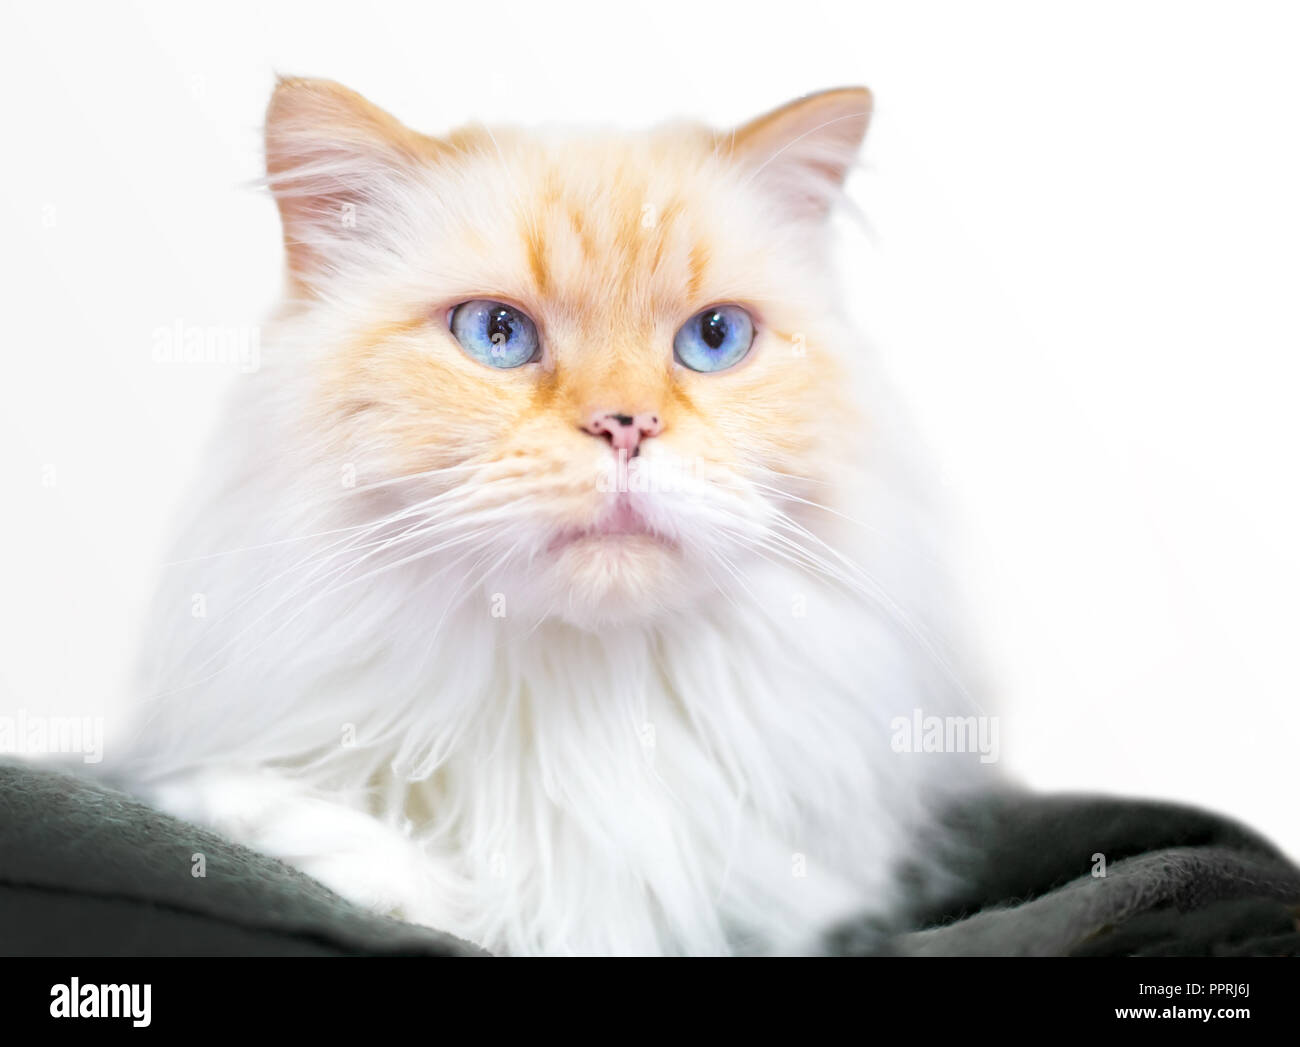 A flame point Himalayan mixed breed cat with blue eyes Stock Photo